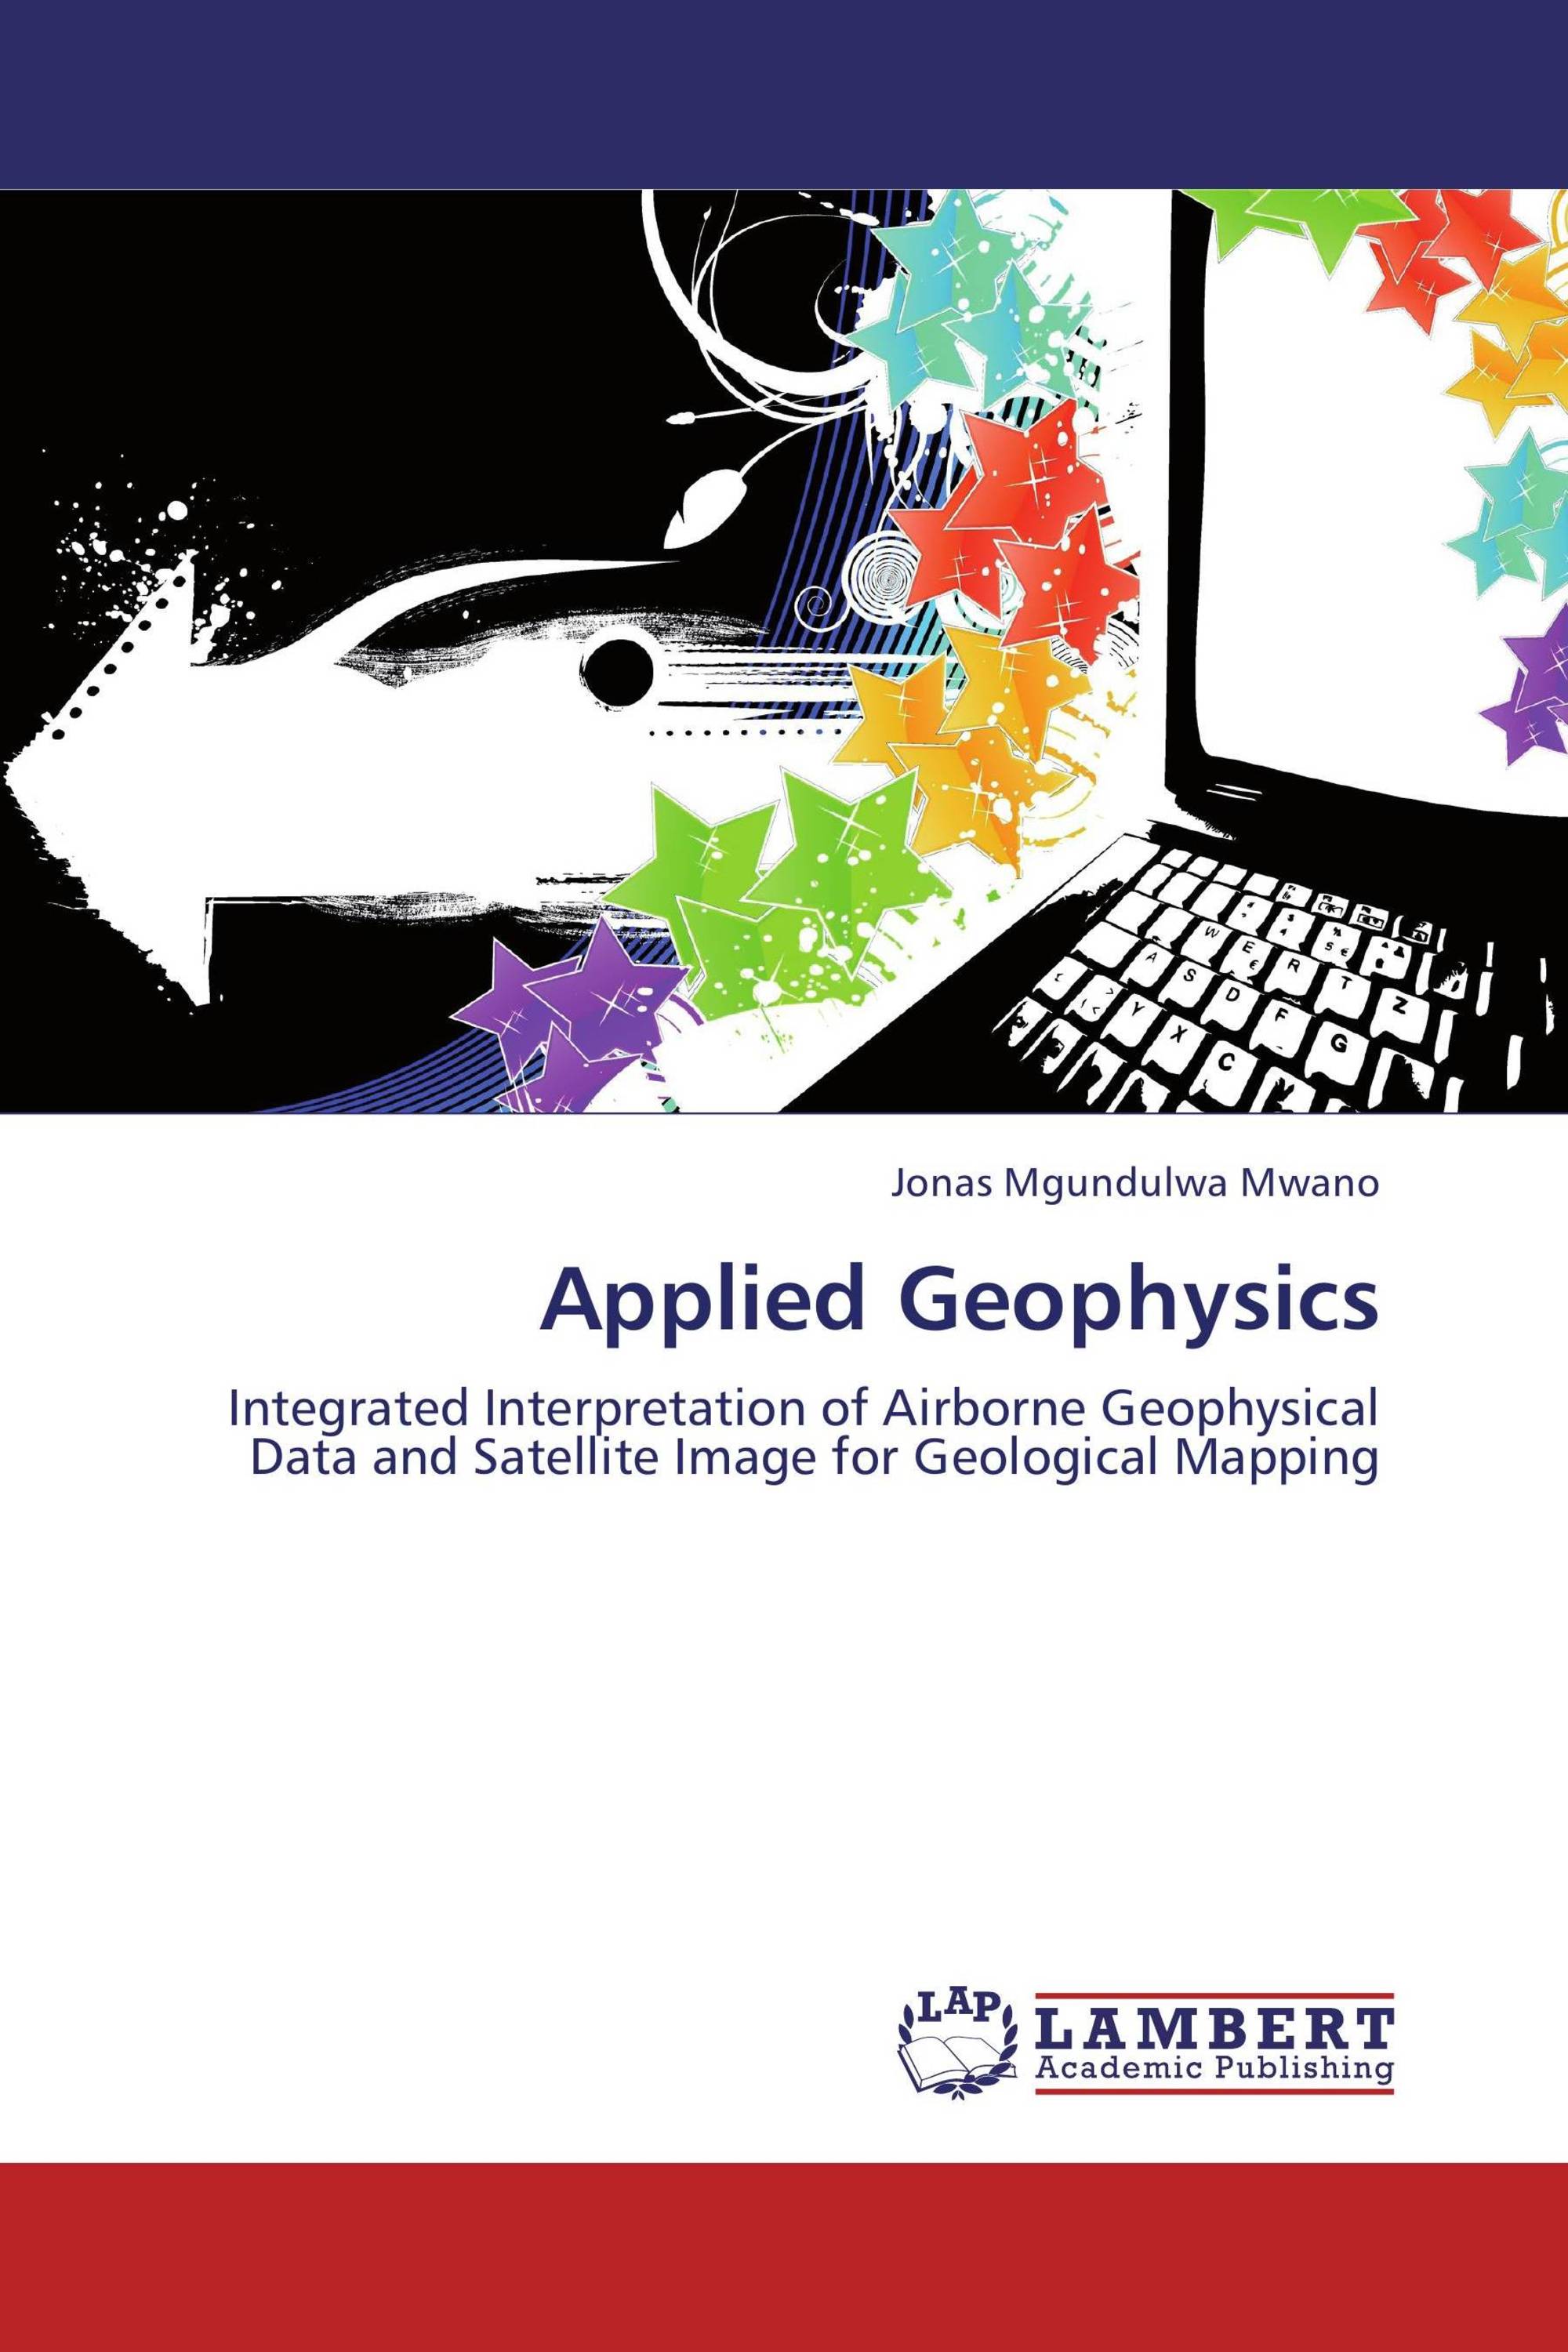 msc research topics in applied geophysics